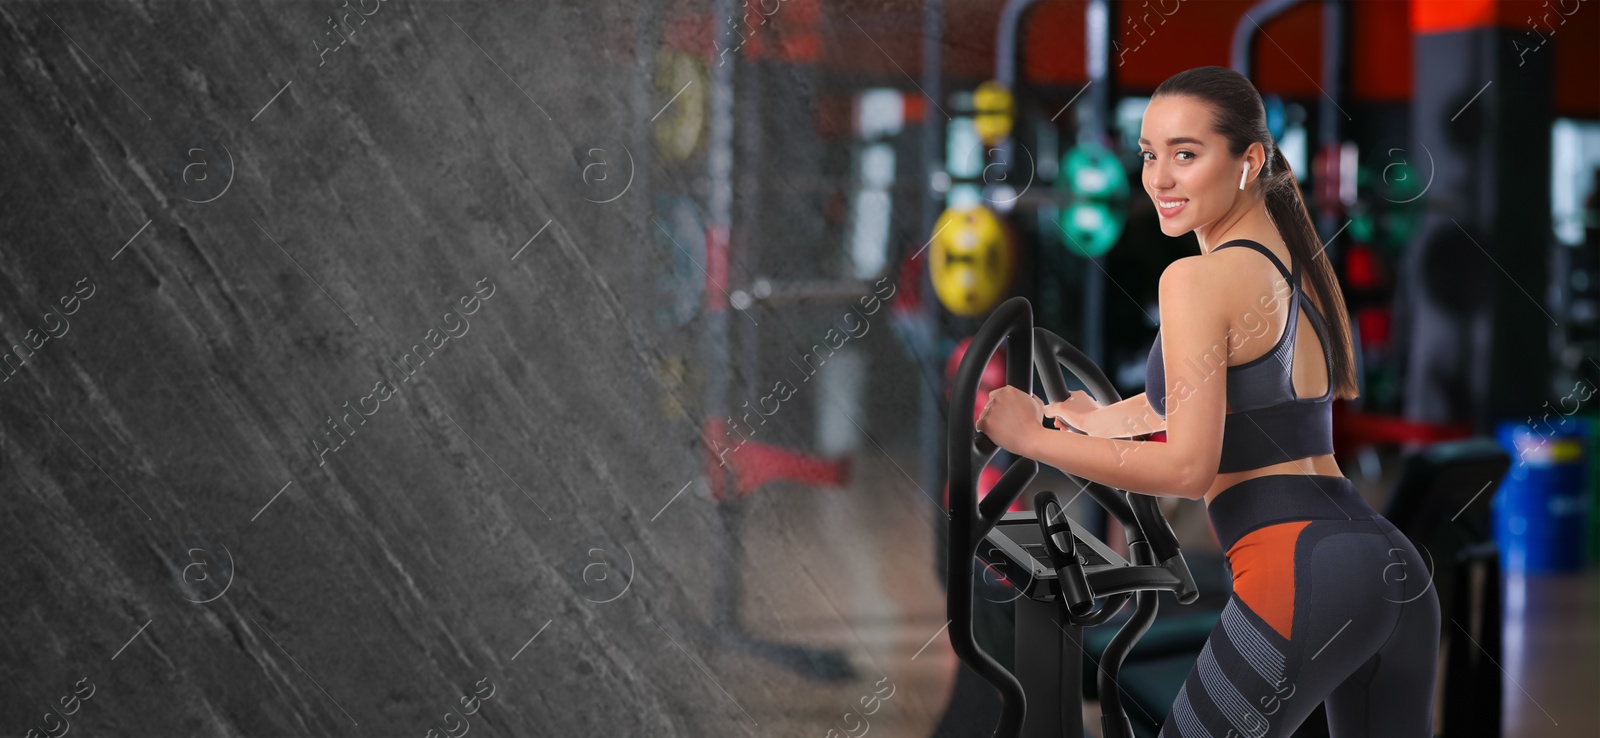 Image of Woman using modern elliptical machine in gym, space for text. Banner design